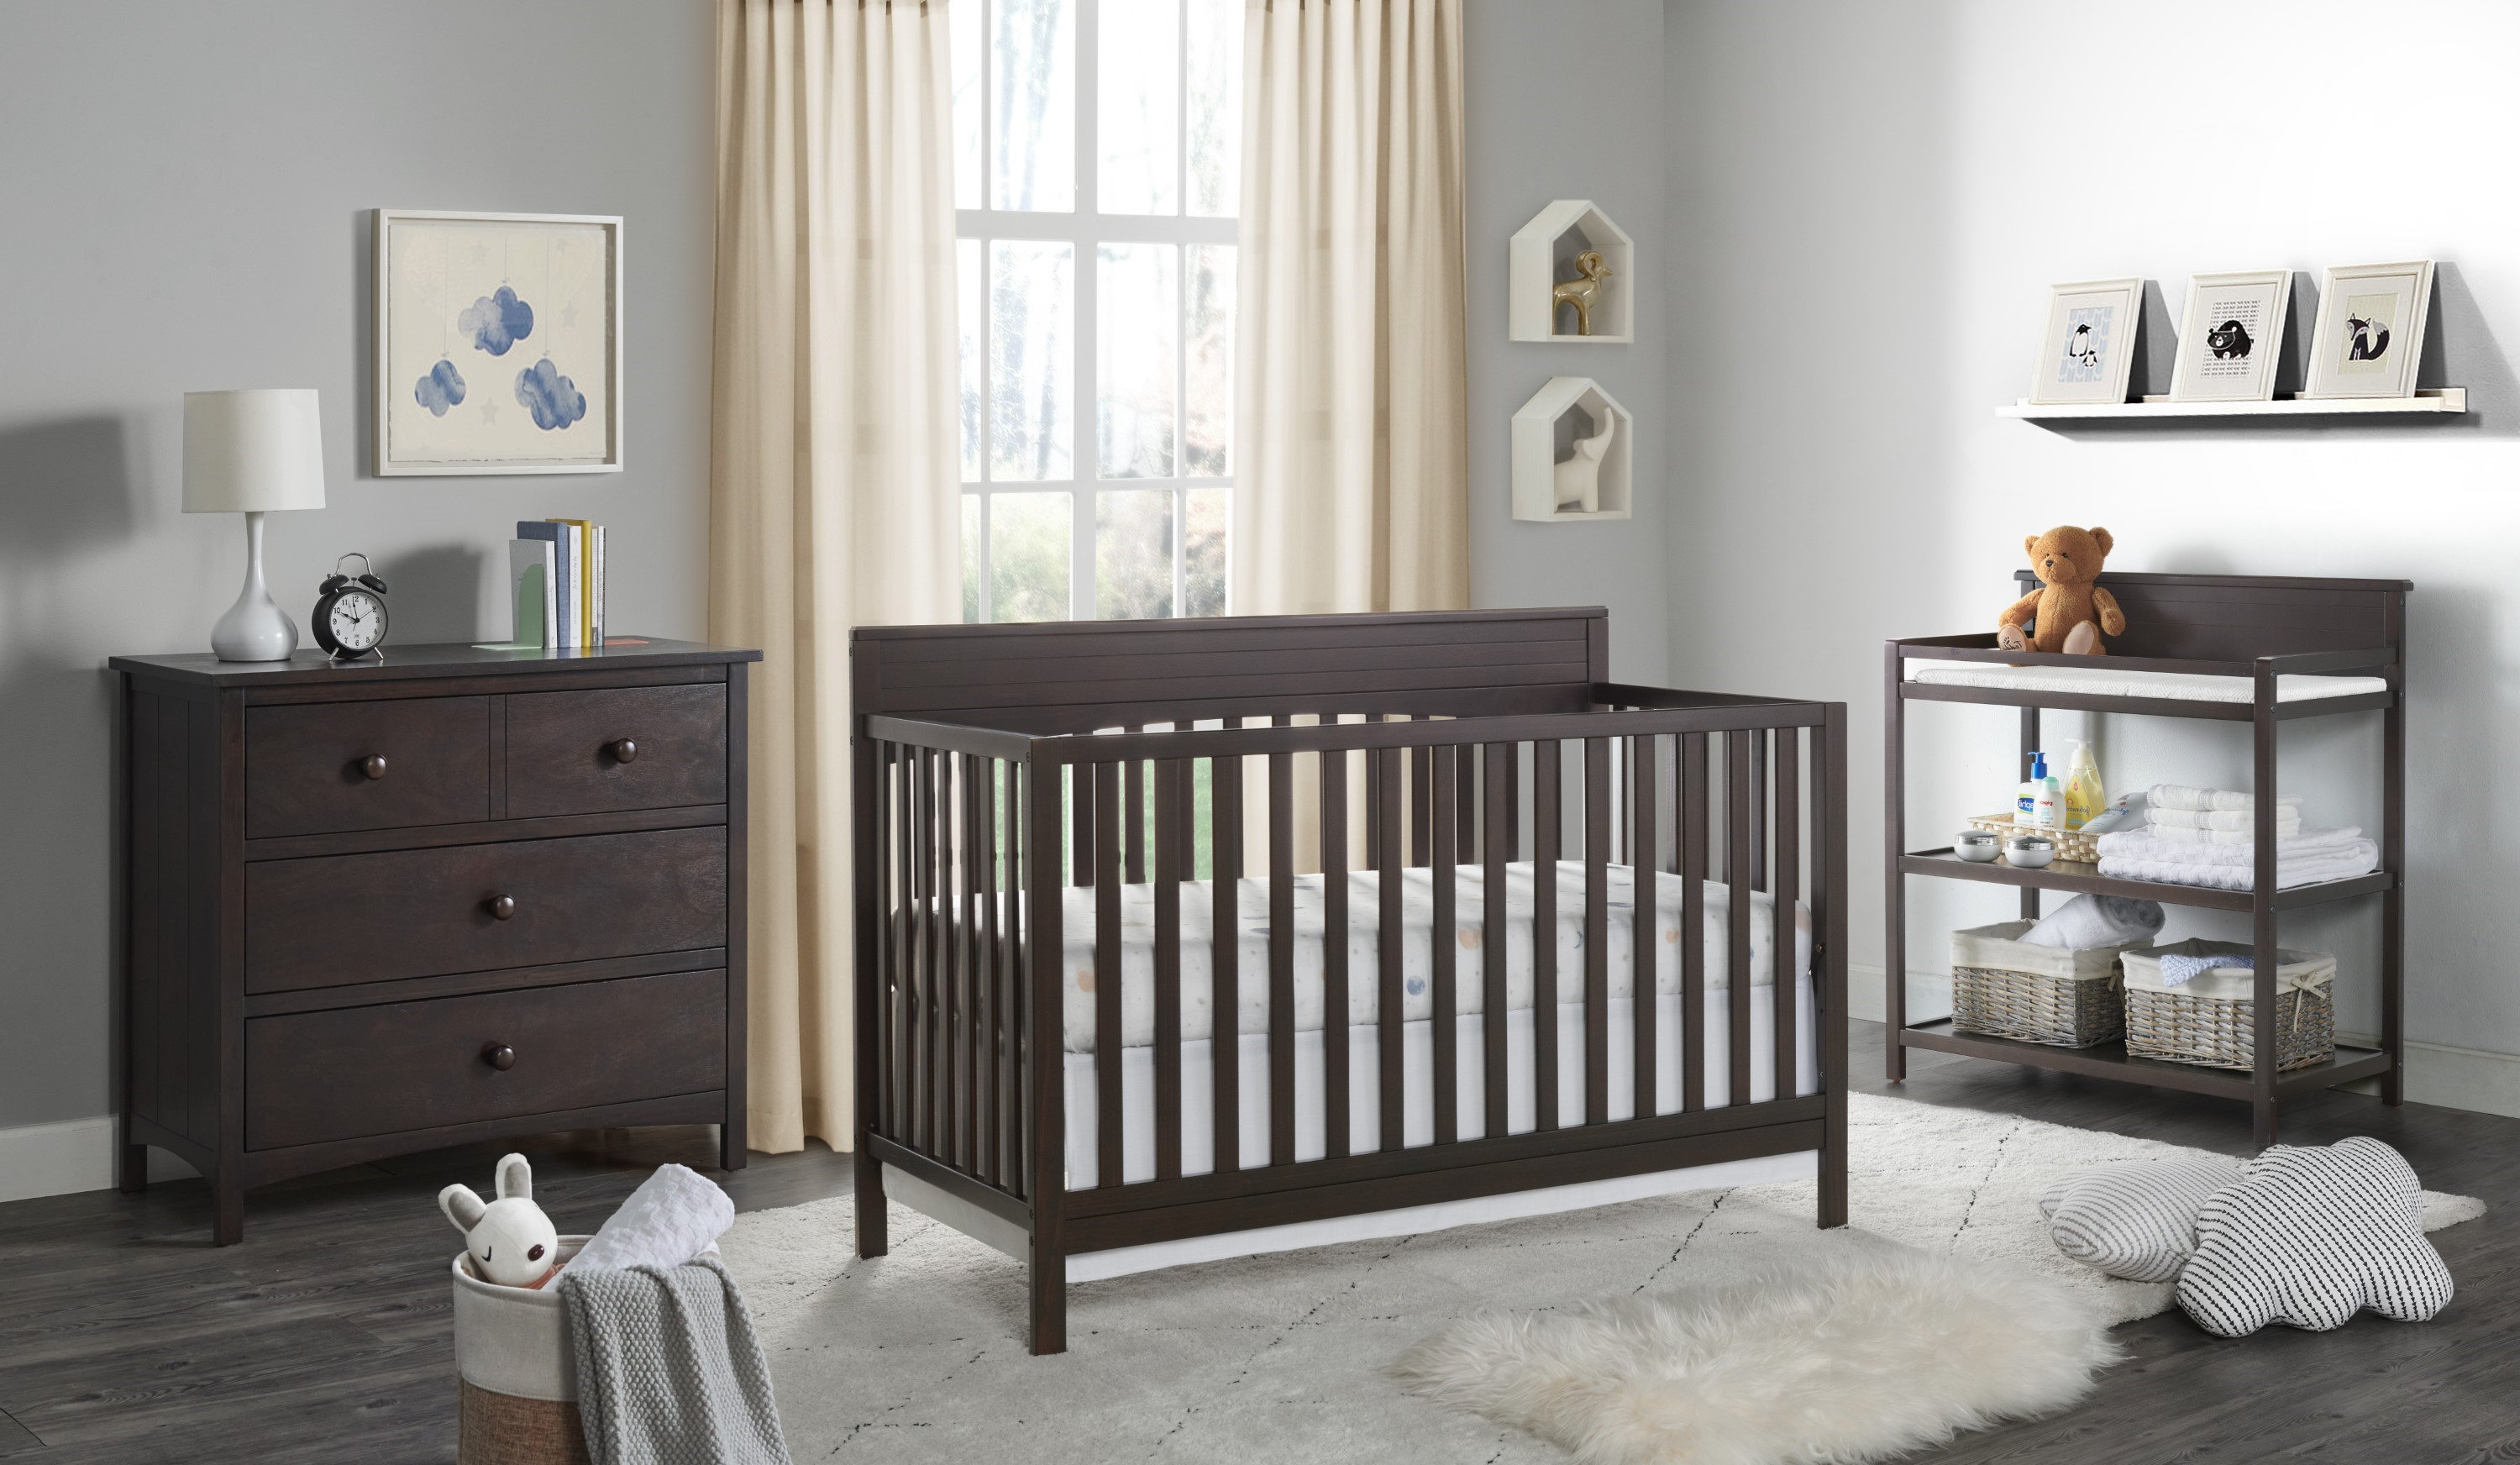 Oxford Baby Harper 4-in-1 Convertible Crib, Espresso Brown, GREENGUARD Gold Certified, Wooden Crib - image 3 of 11